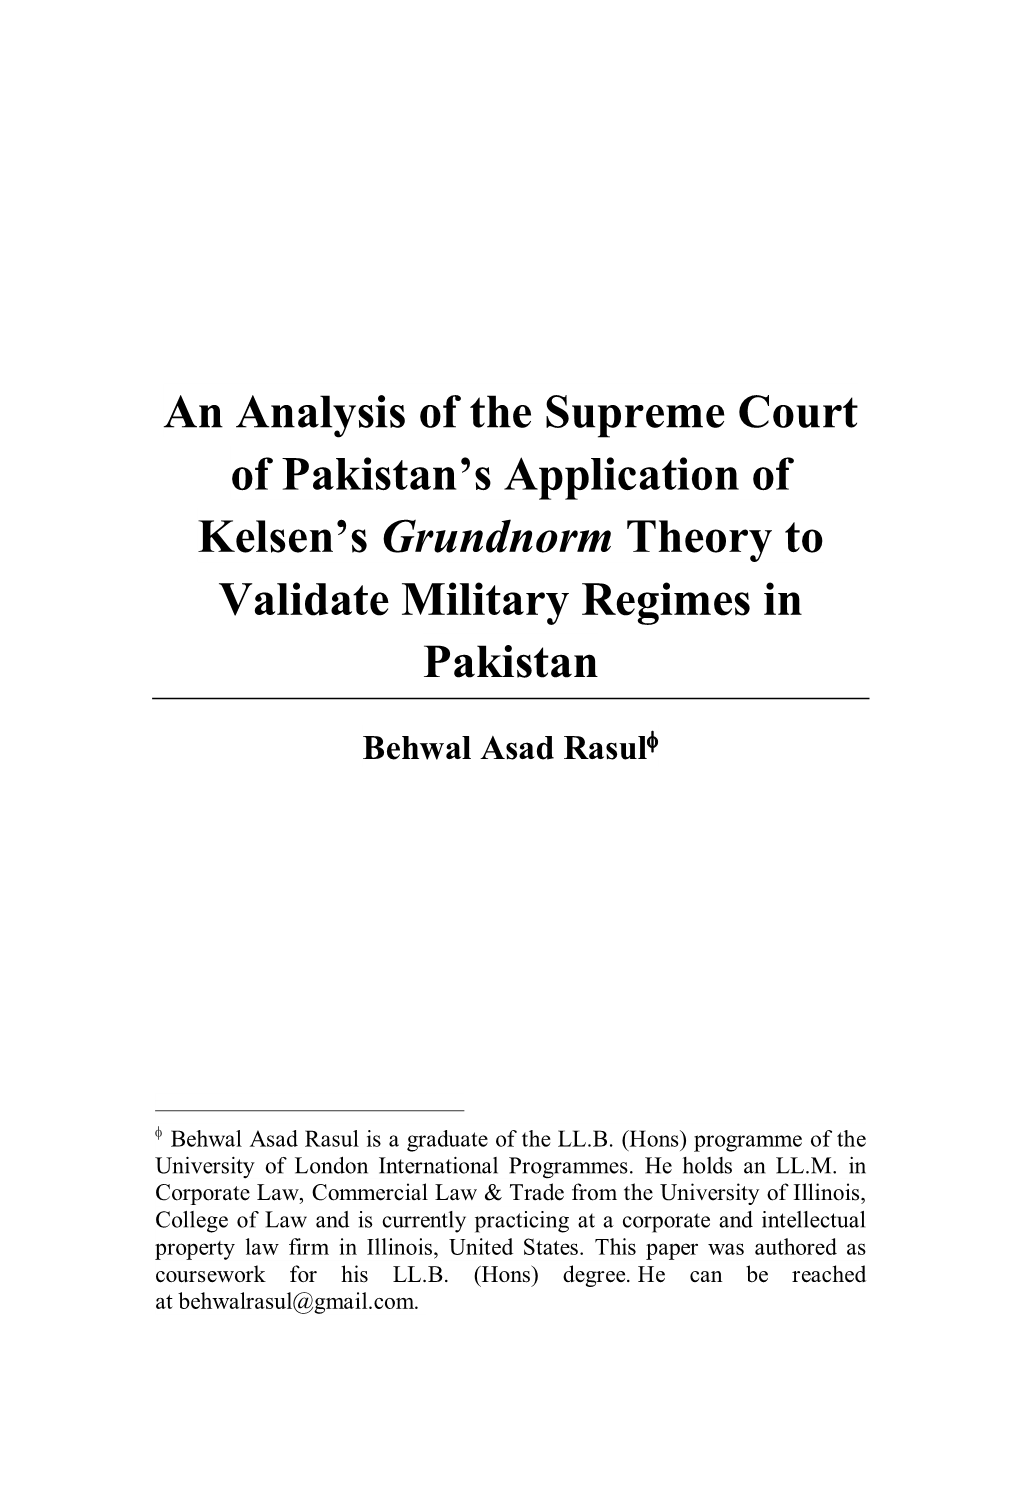 An Analysis of the Supreme Court of Pakistan's Application of Kelsen's